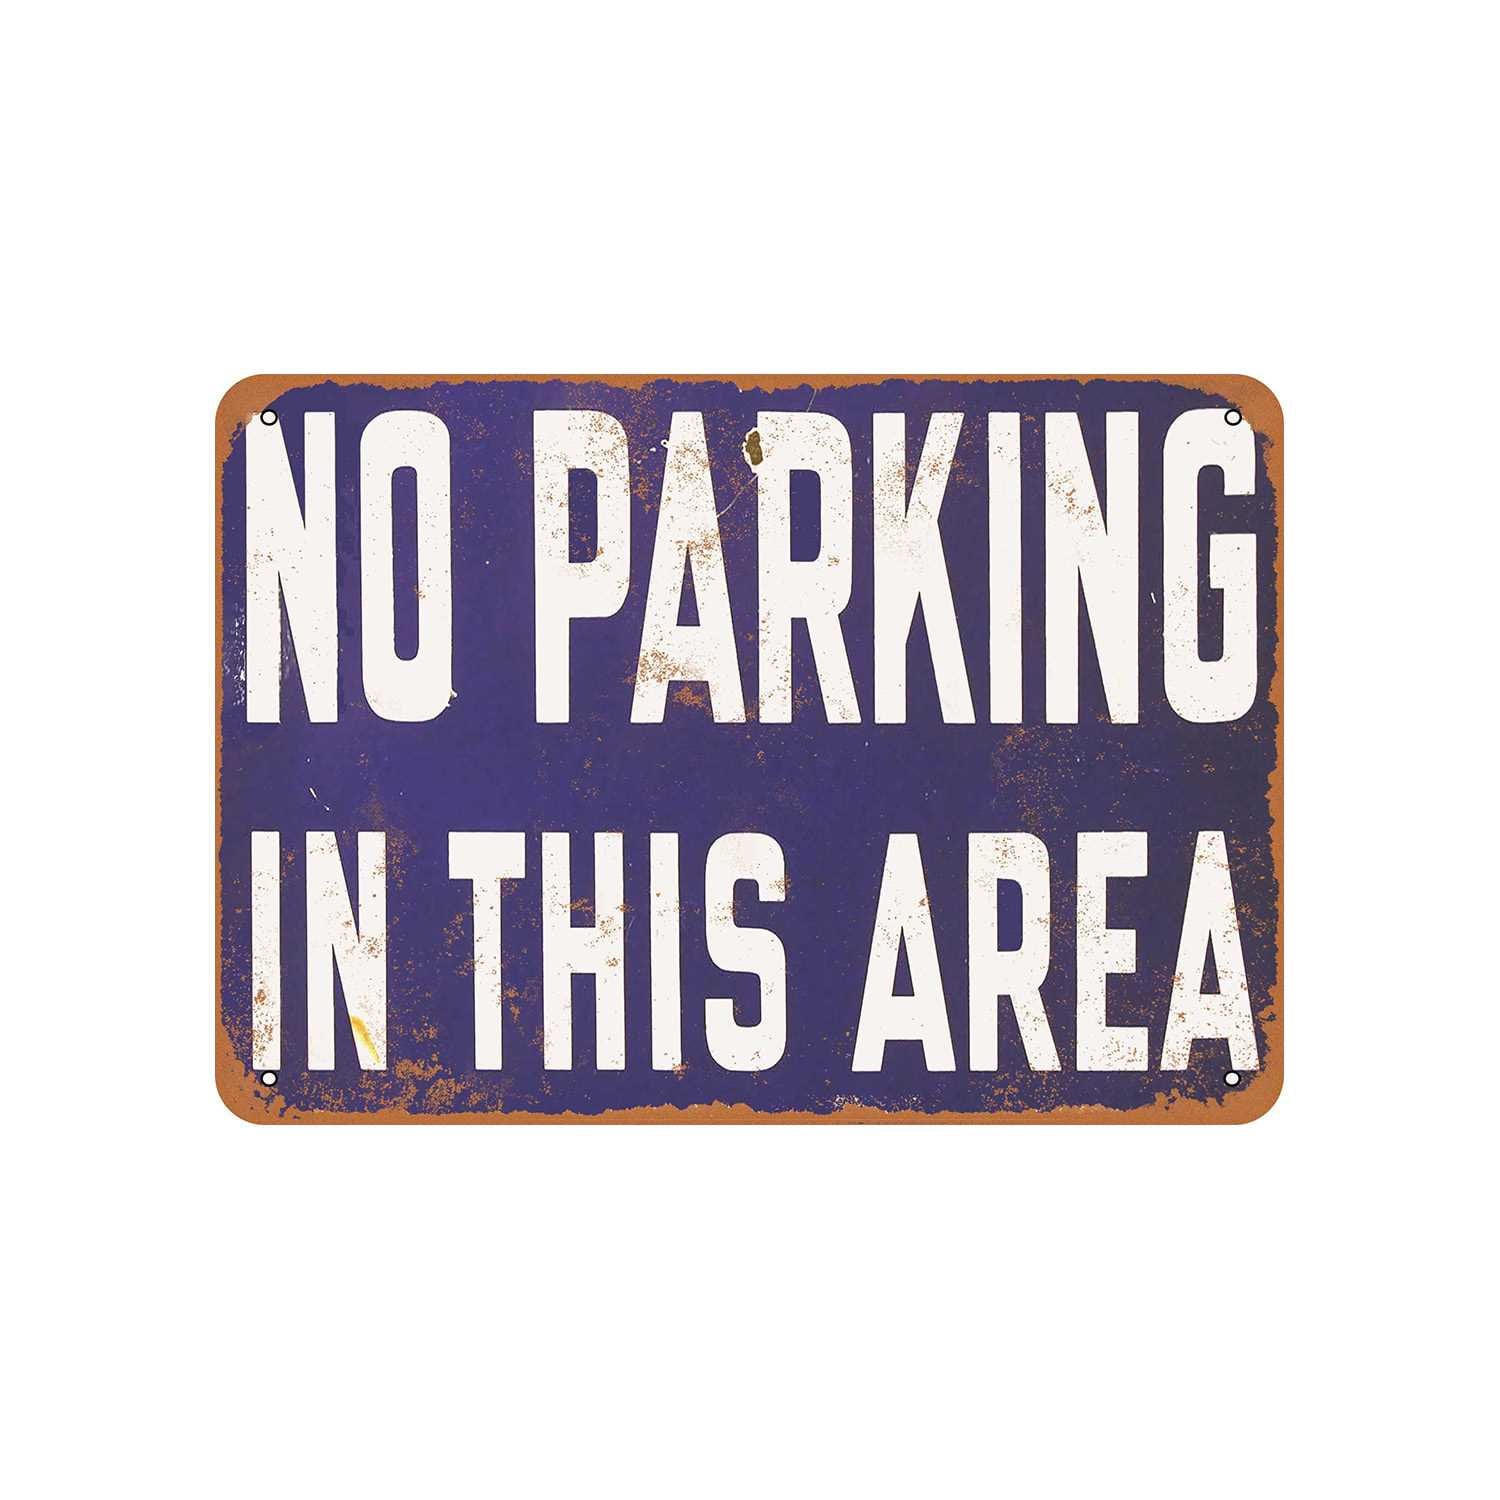 NO PARKING 24hr Access Required Shabby Chic 8x10" Metal Sign Retro Property #236 